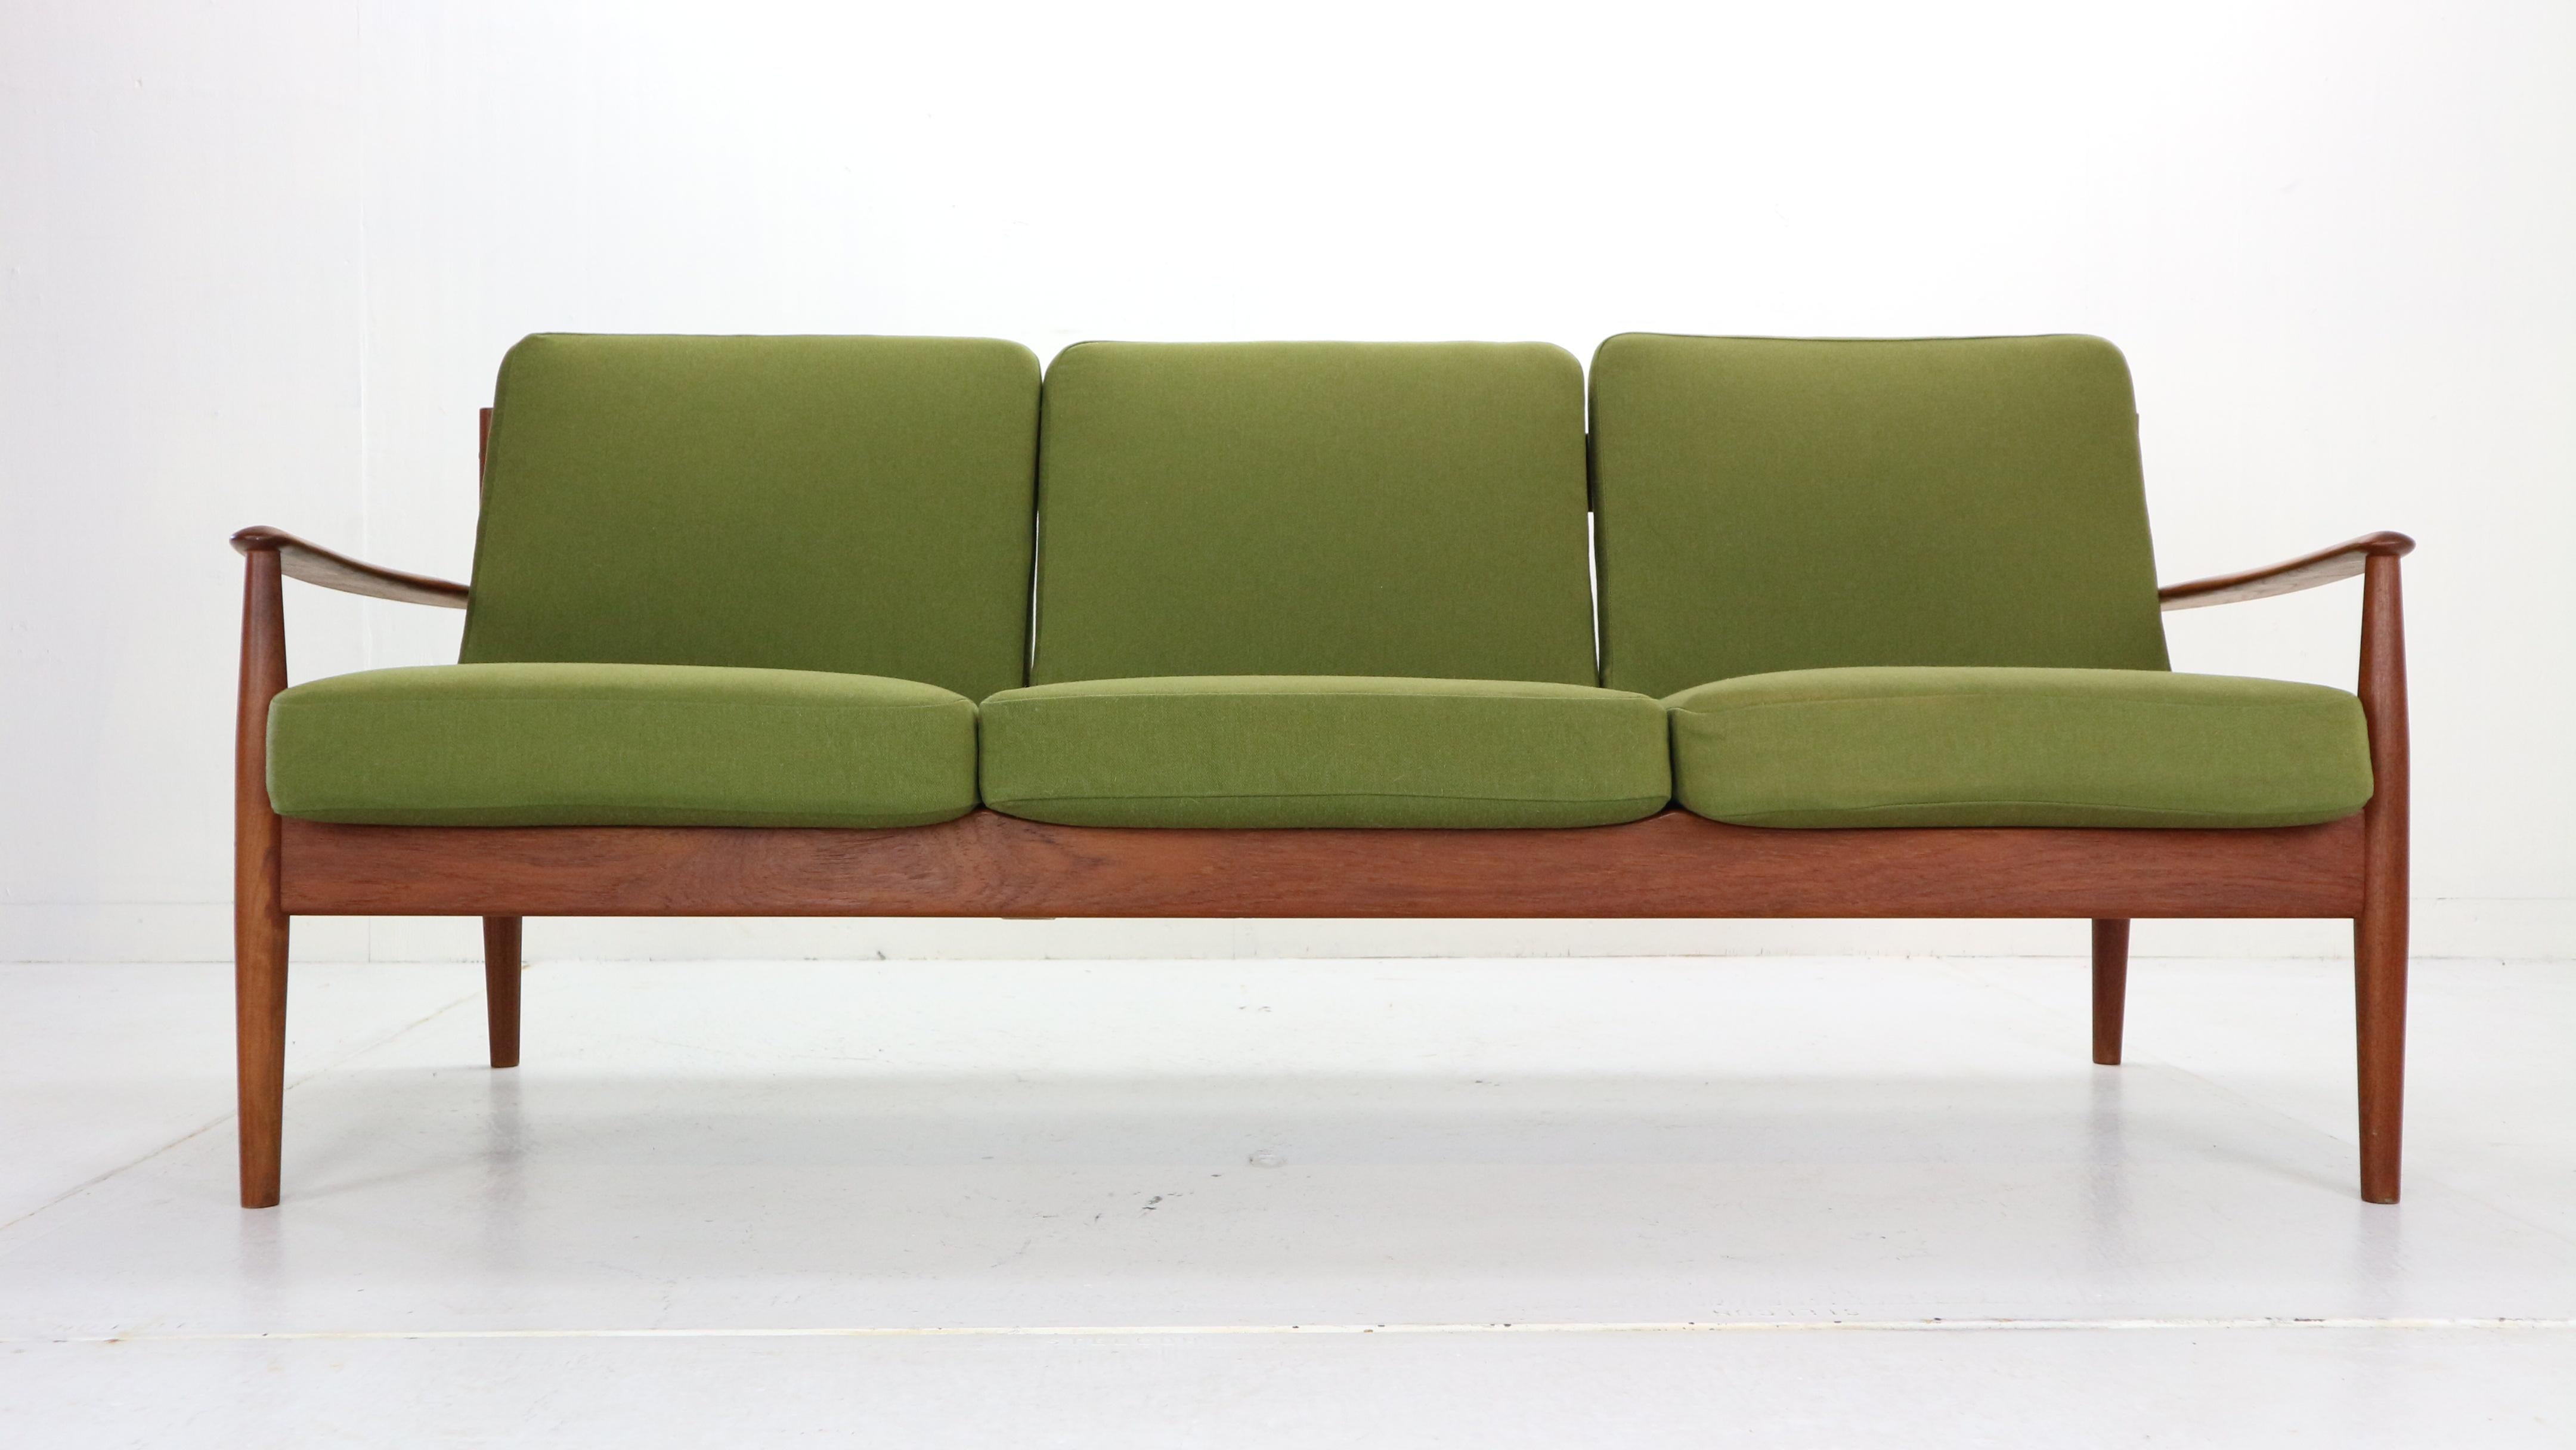 Scandinavian Modern design three-seat sofa designed by Grete Jalk and manufactured for France & Son in 1963, Denmark.
Model No: 118.
Sculpted frame, back and armrests are made from solid teak wood.
The green color cushions are made from high